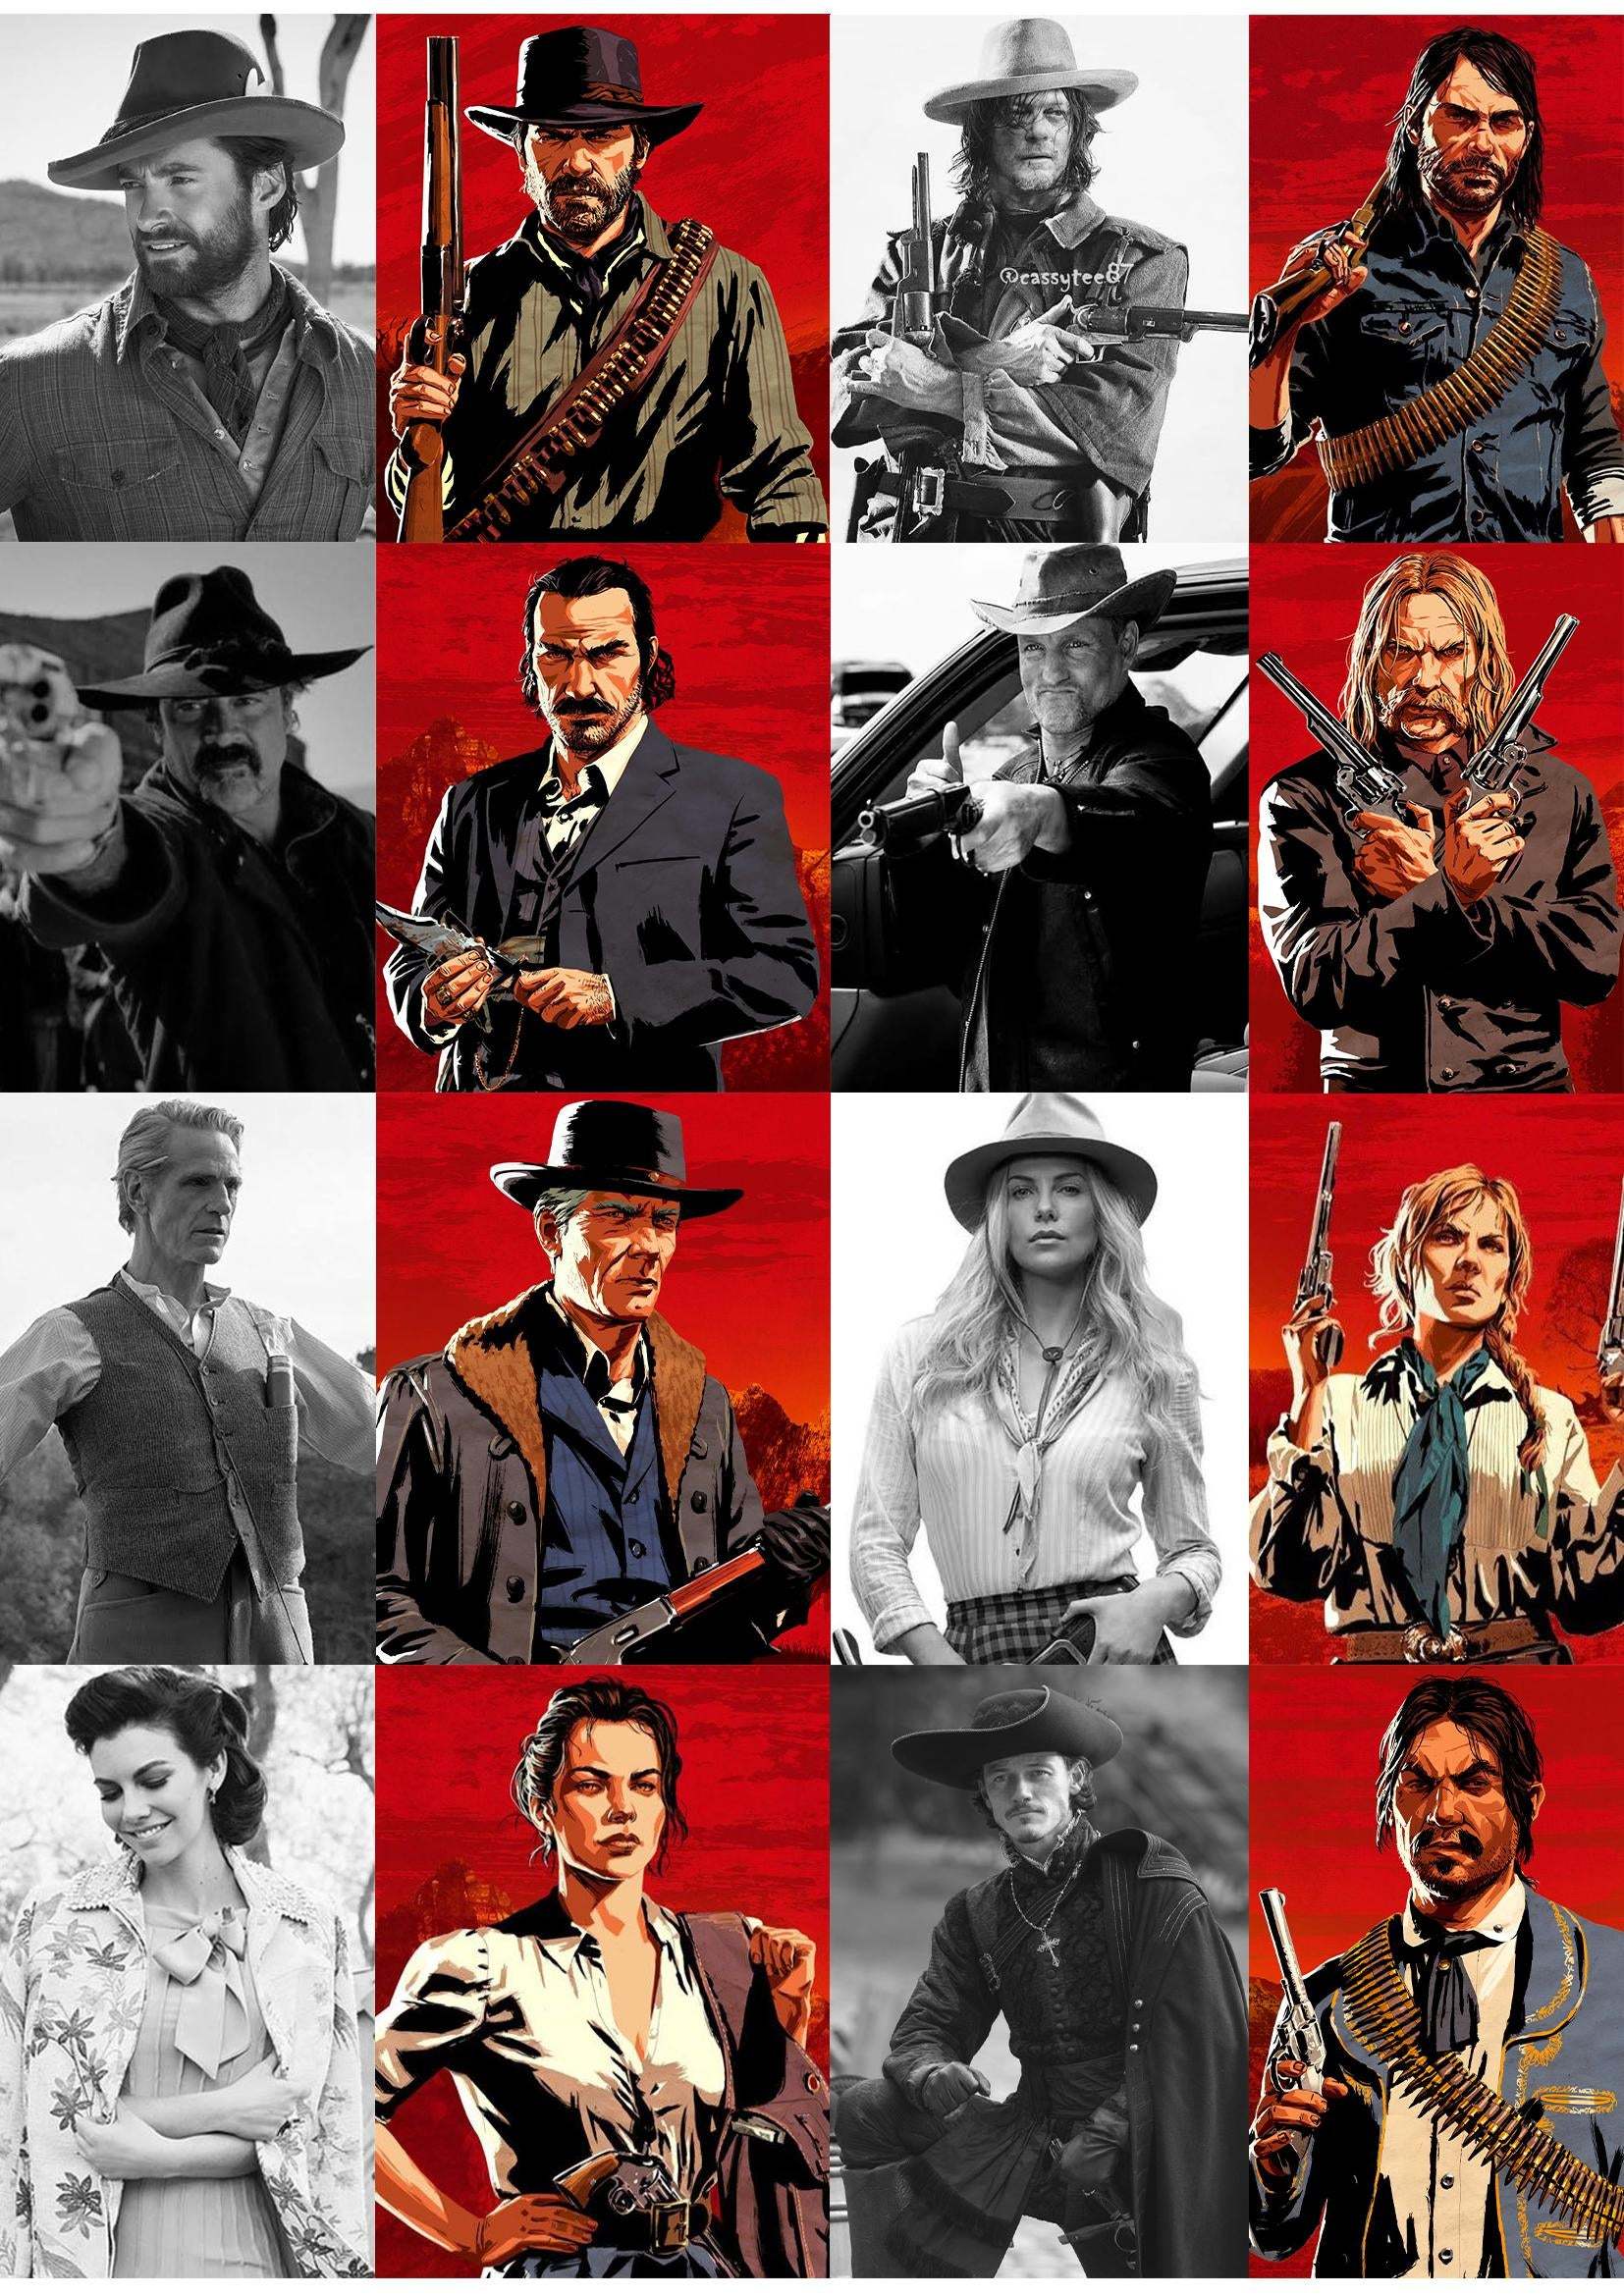 Red Dead Redemption e Red Dead Redemption 2